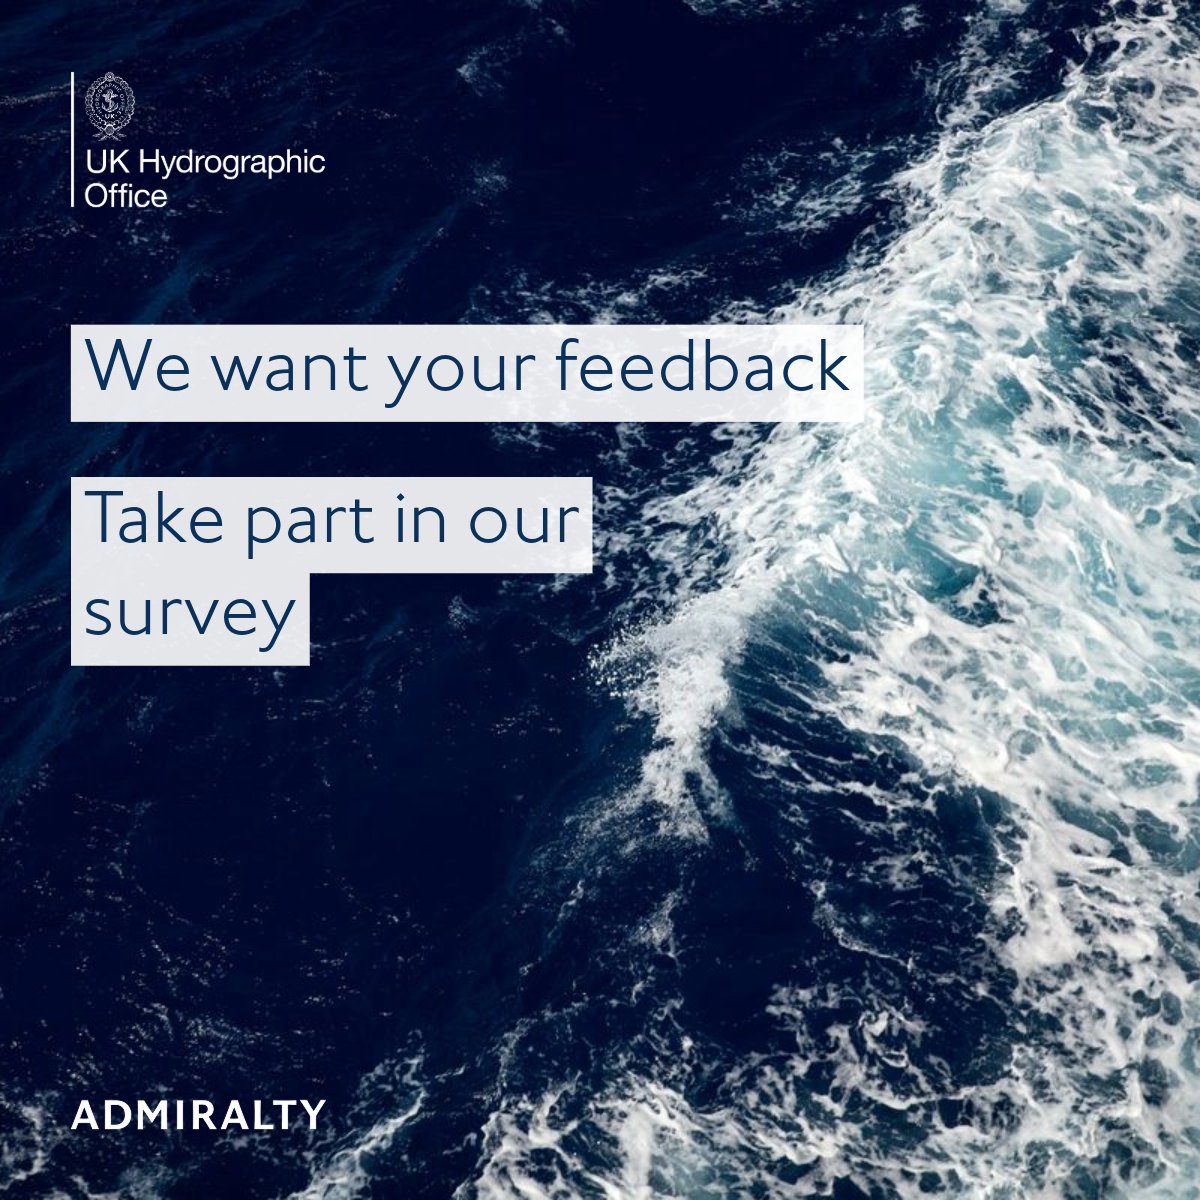 We're committed to improving your experience as a customer of our products and services. We would be grateful for your feedback. Our short survey will take approximately 10 minutes to complete. Have your say: ow.ly/TBuz50QTjxn